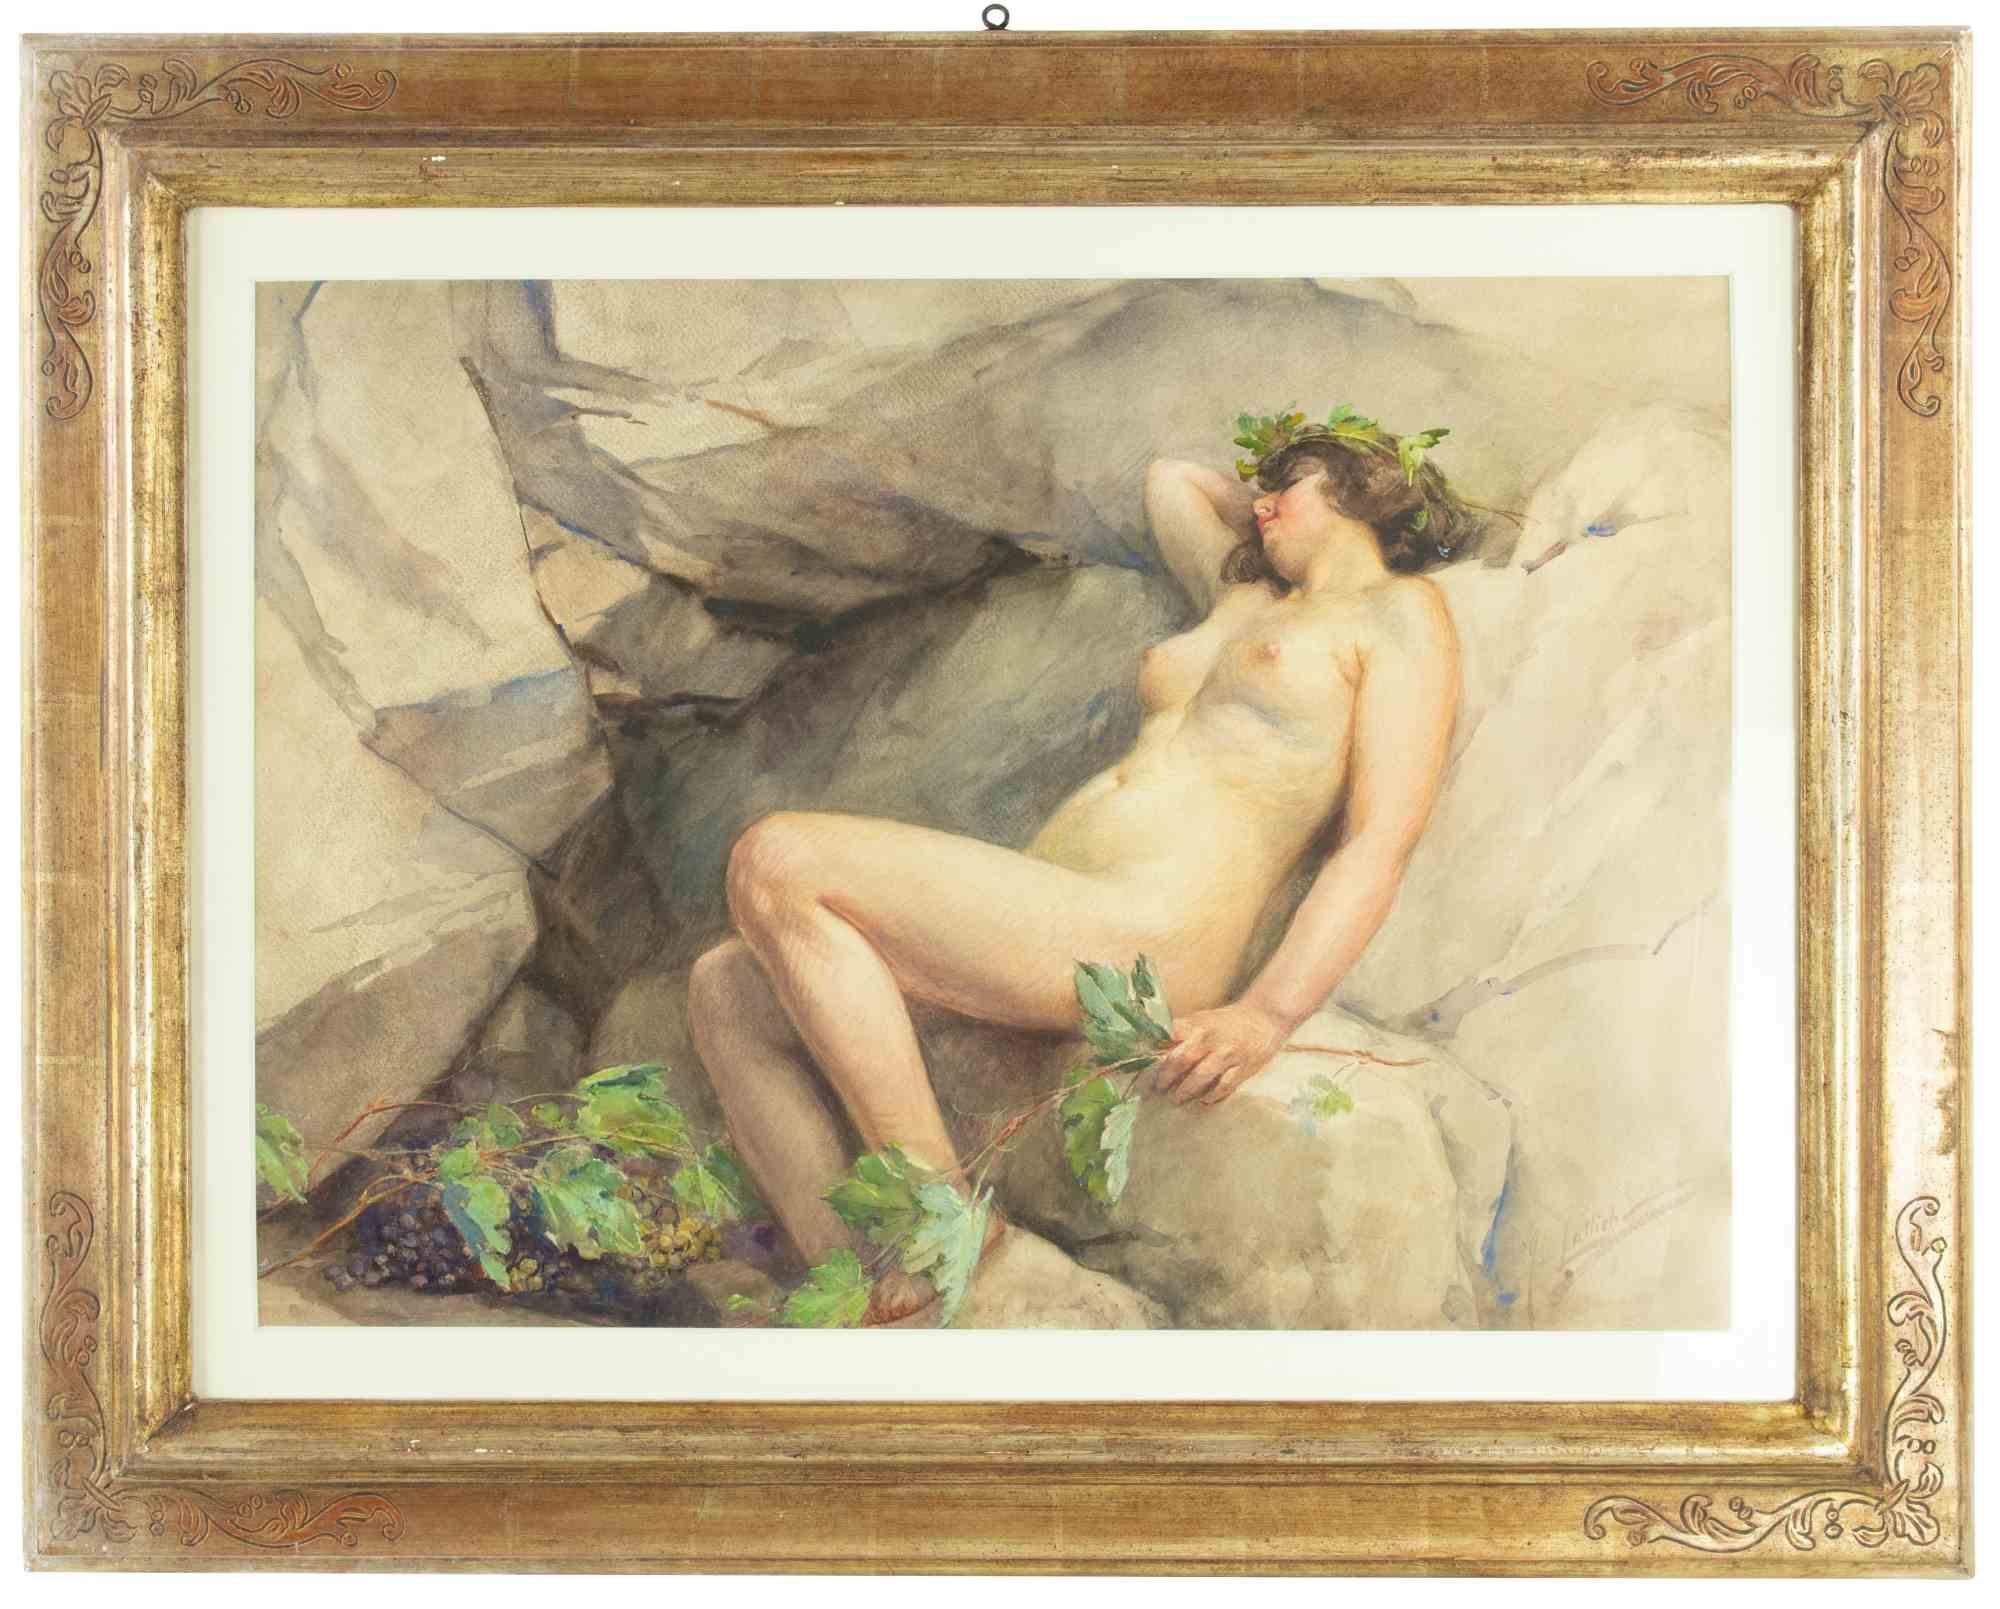 Naked Woman on the Rocks - Drawing by G. Lallich - Early 20th Century